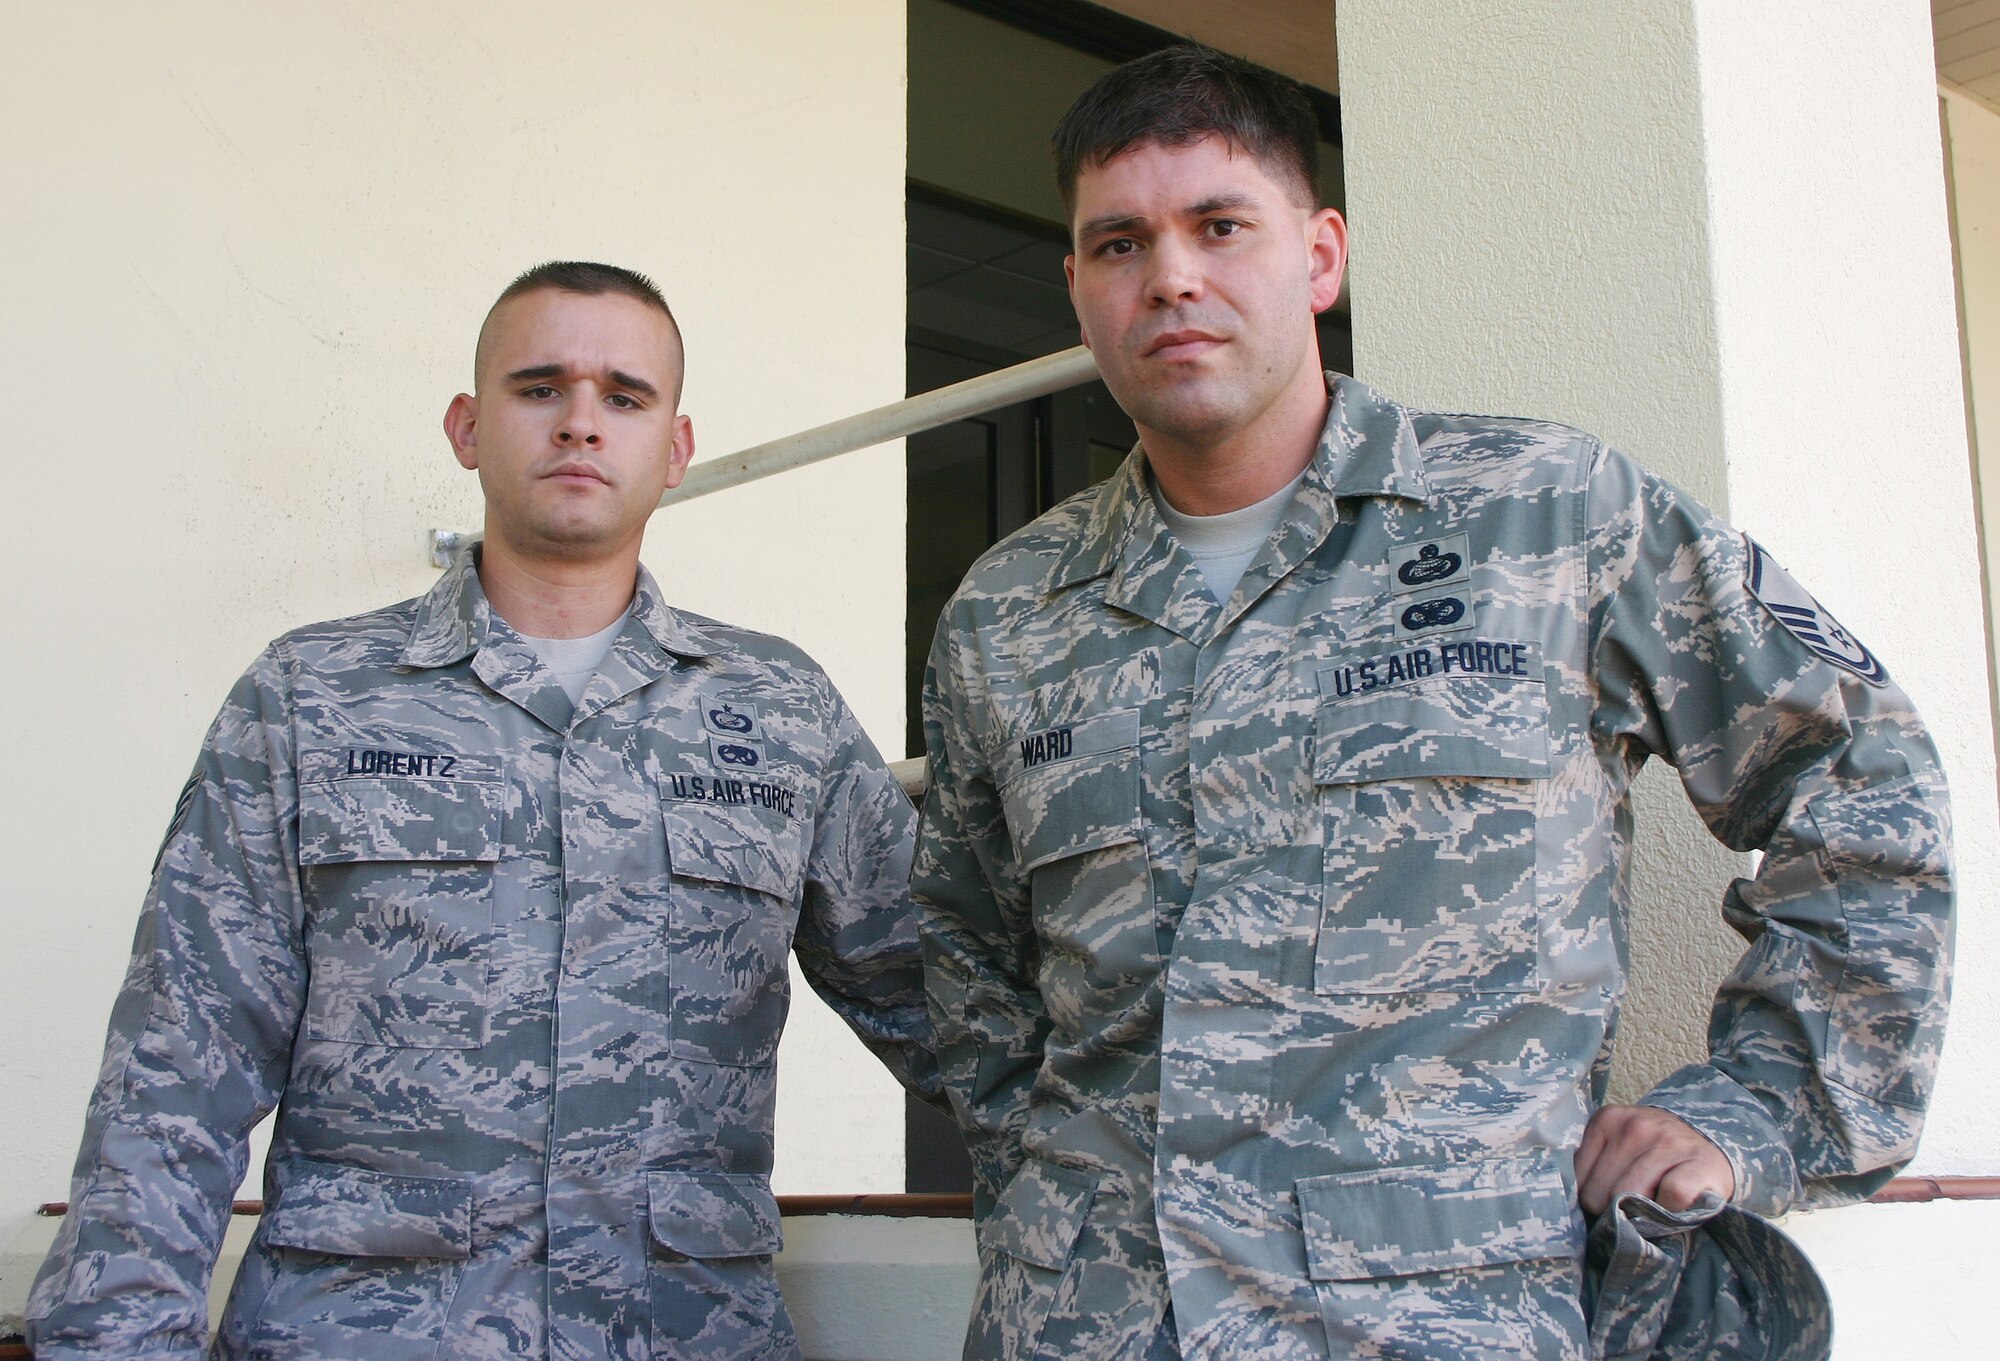 Master Sgt. Jeffery Ward (right) and Staff Sgt. Justin Lorentz are Air Force training managers at the Air Force Personnel Center, Randolph Air Force Base, Texas.  Sergeant Ward recently received the Air Force Commendation Medal for providing lifesaving assistance to Sergeant Lorentz after he had a seizure and became unconscious. (U.S. Air Force photo/Richard Salomon)  